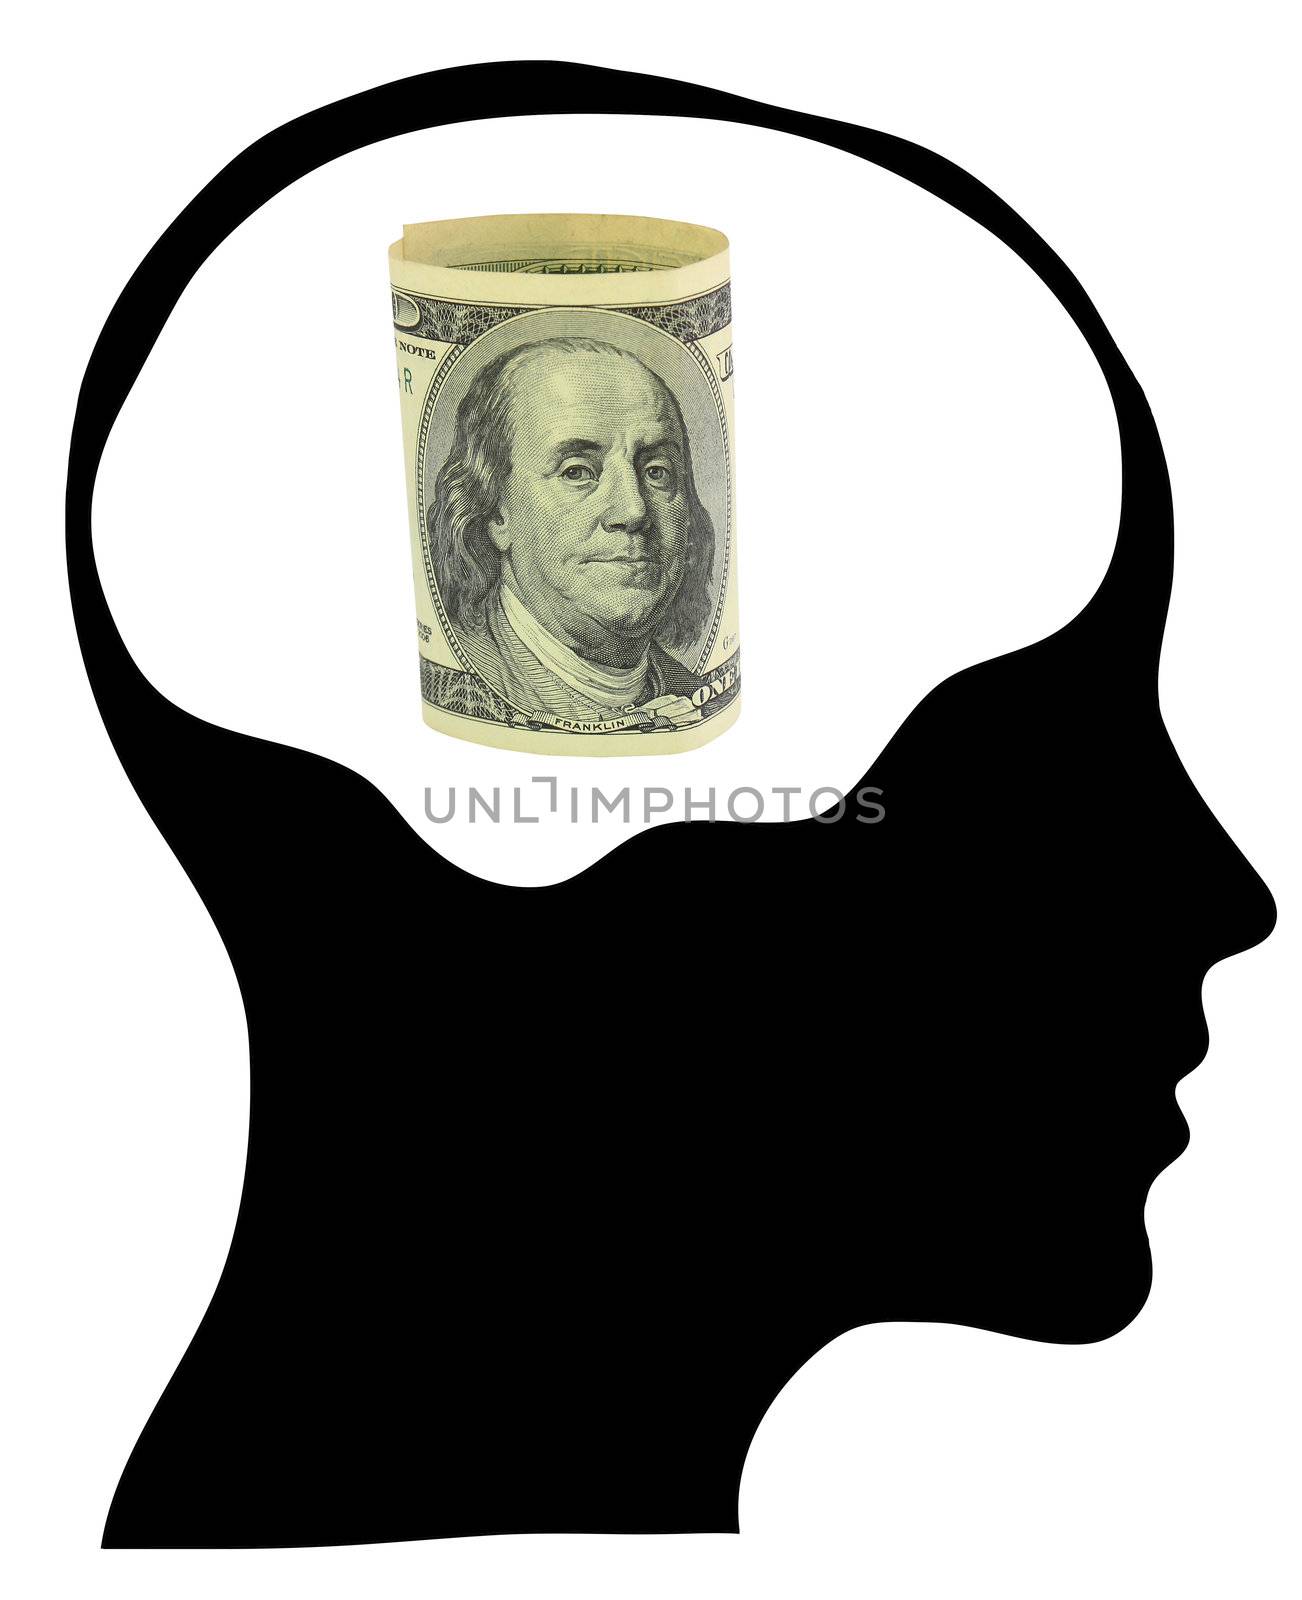 Dollars to control the human brain,  by rufous